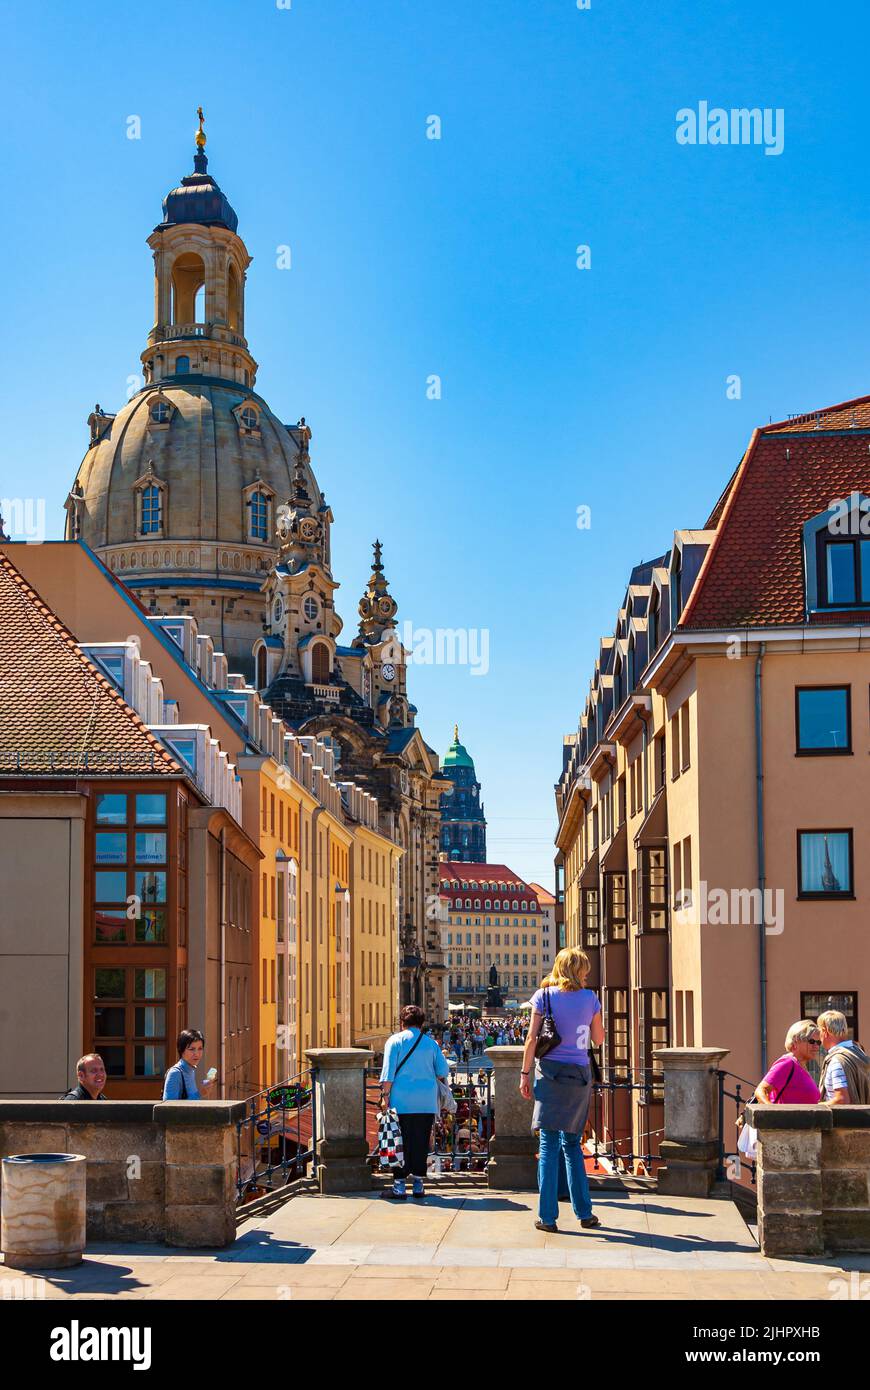 Dresden, Saxony, Germany, May 24, 2009: Numerous tourists and day trippers stroll along Bruehl Terrace and enjoy the view of the Frauenkirche church. Stock Photo